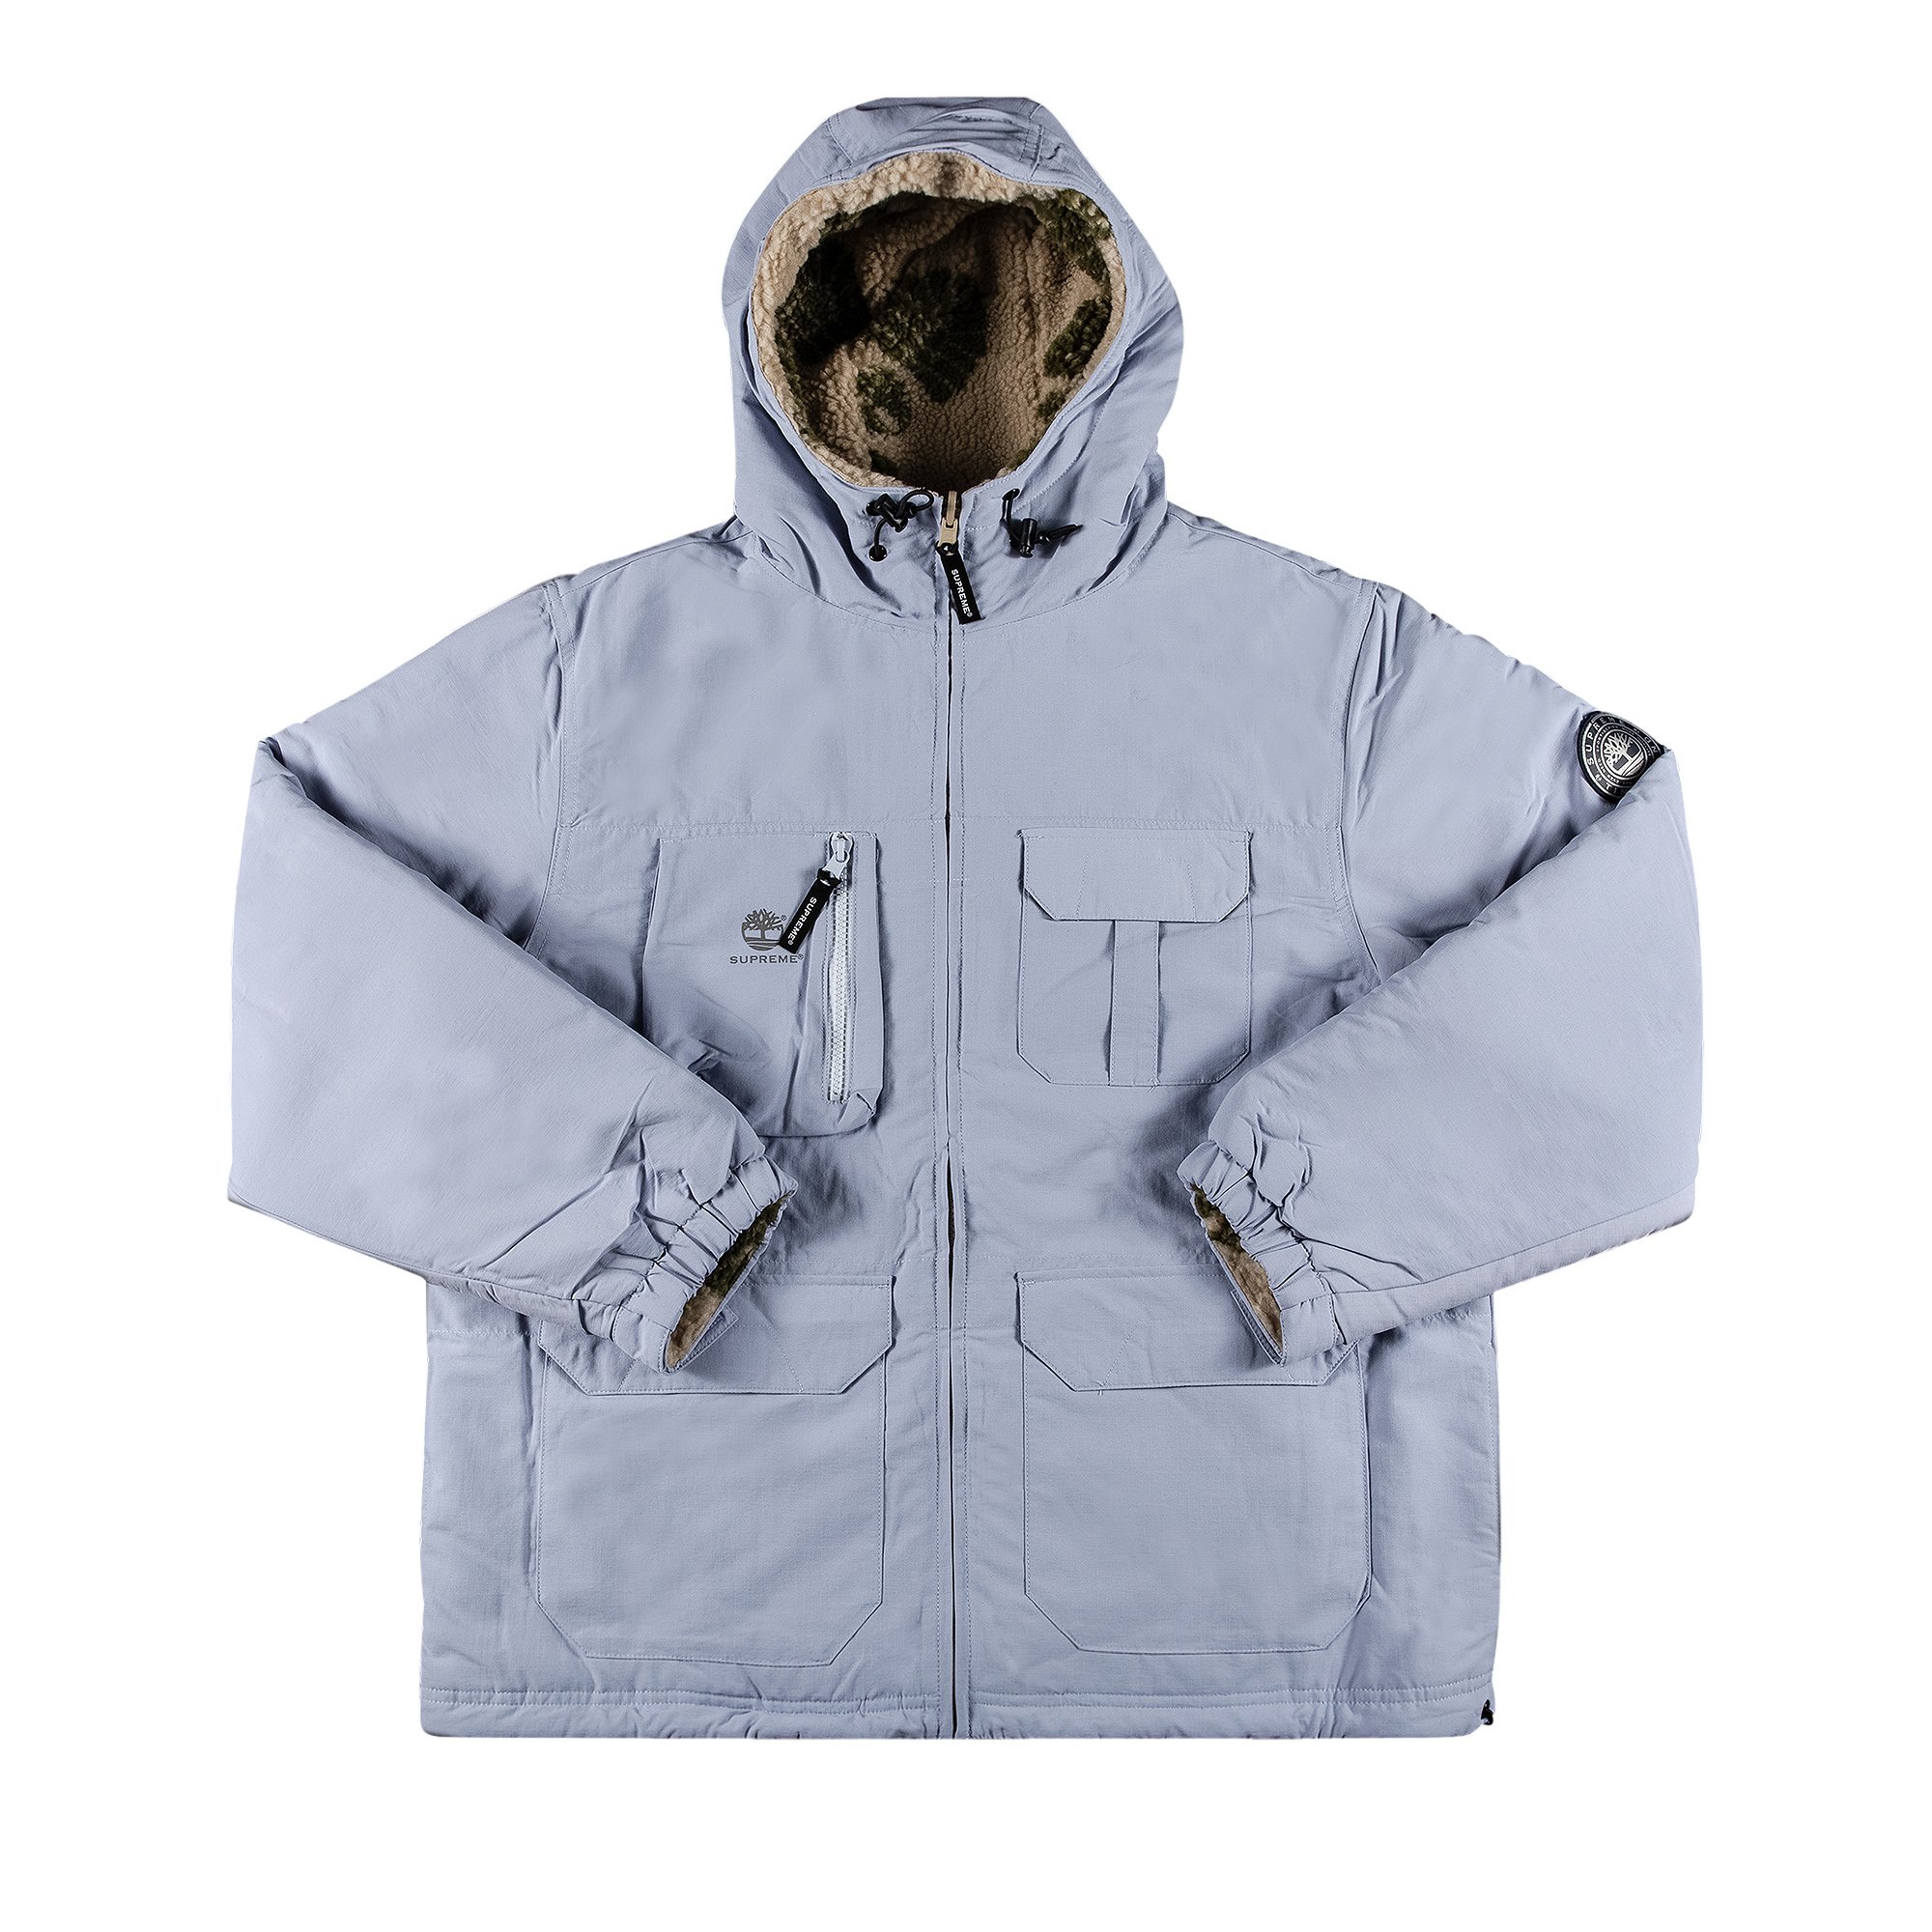 Buy Supreme x Timberland Reversible Ripstop Jacket 'Dusty Blue